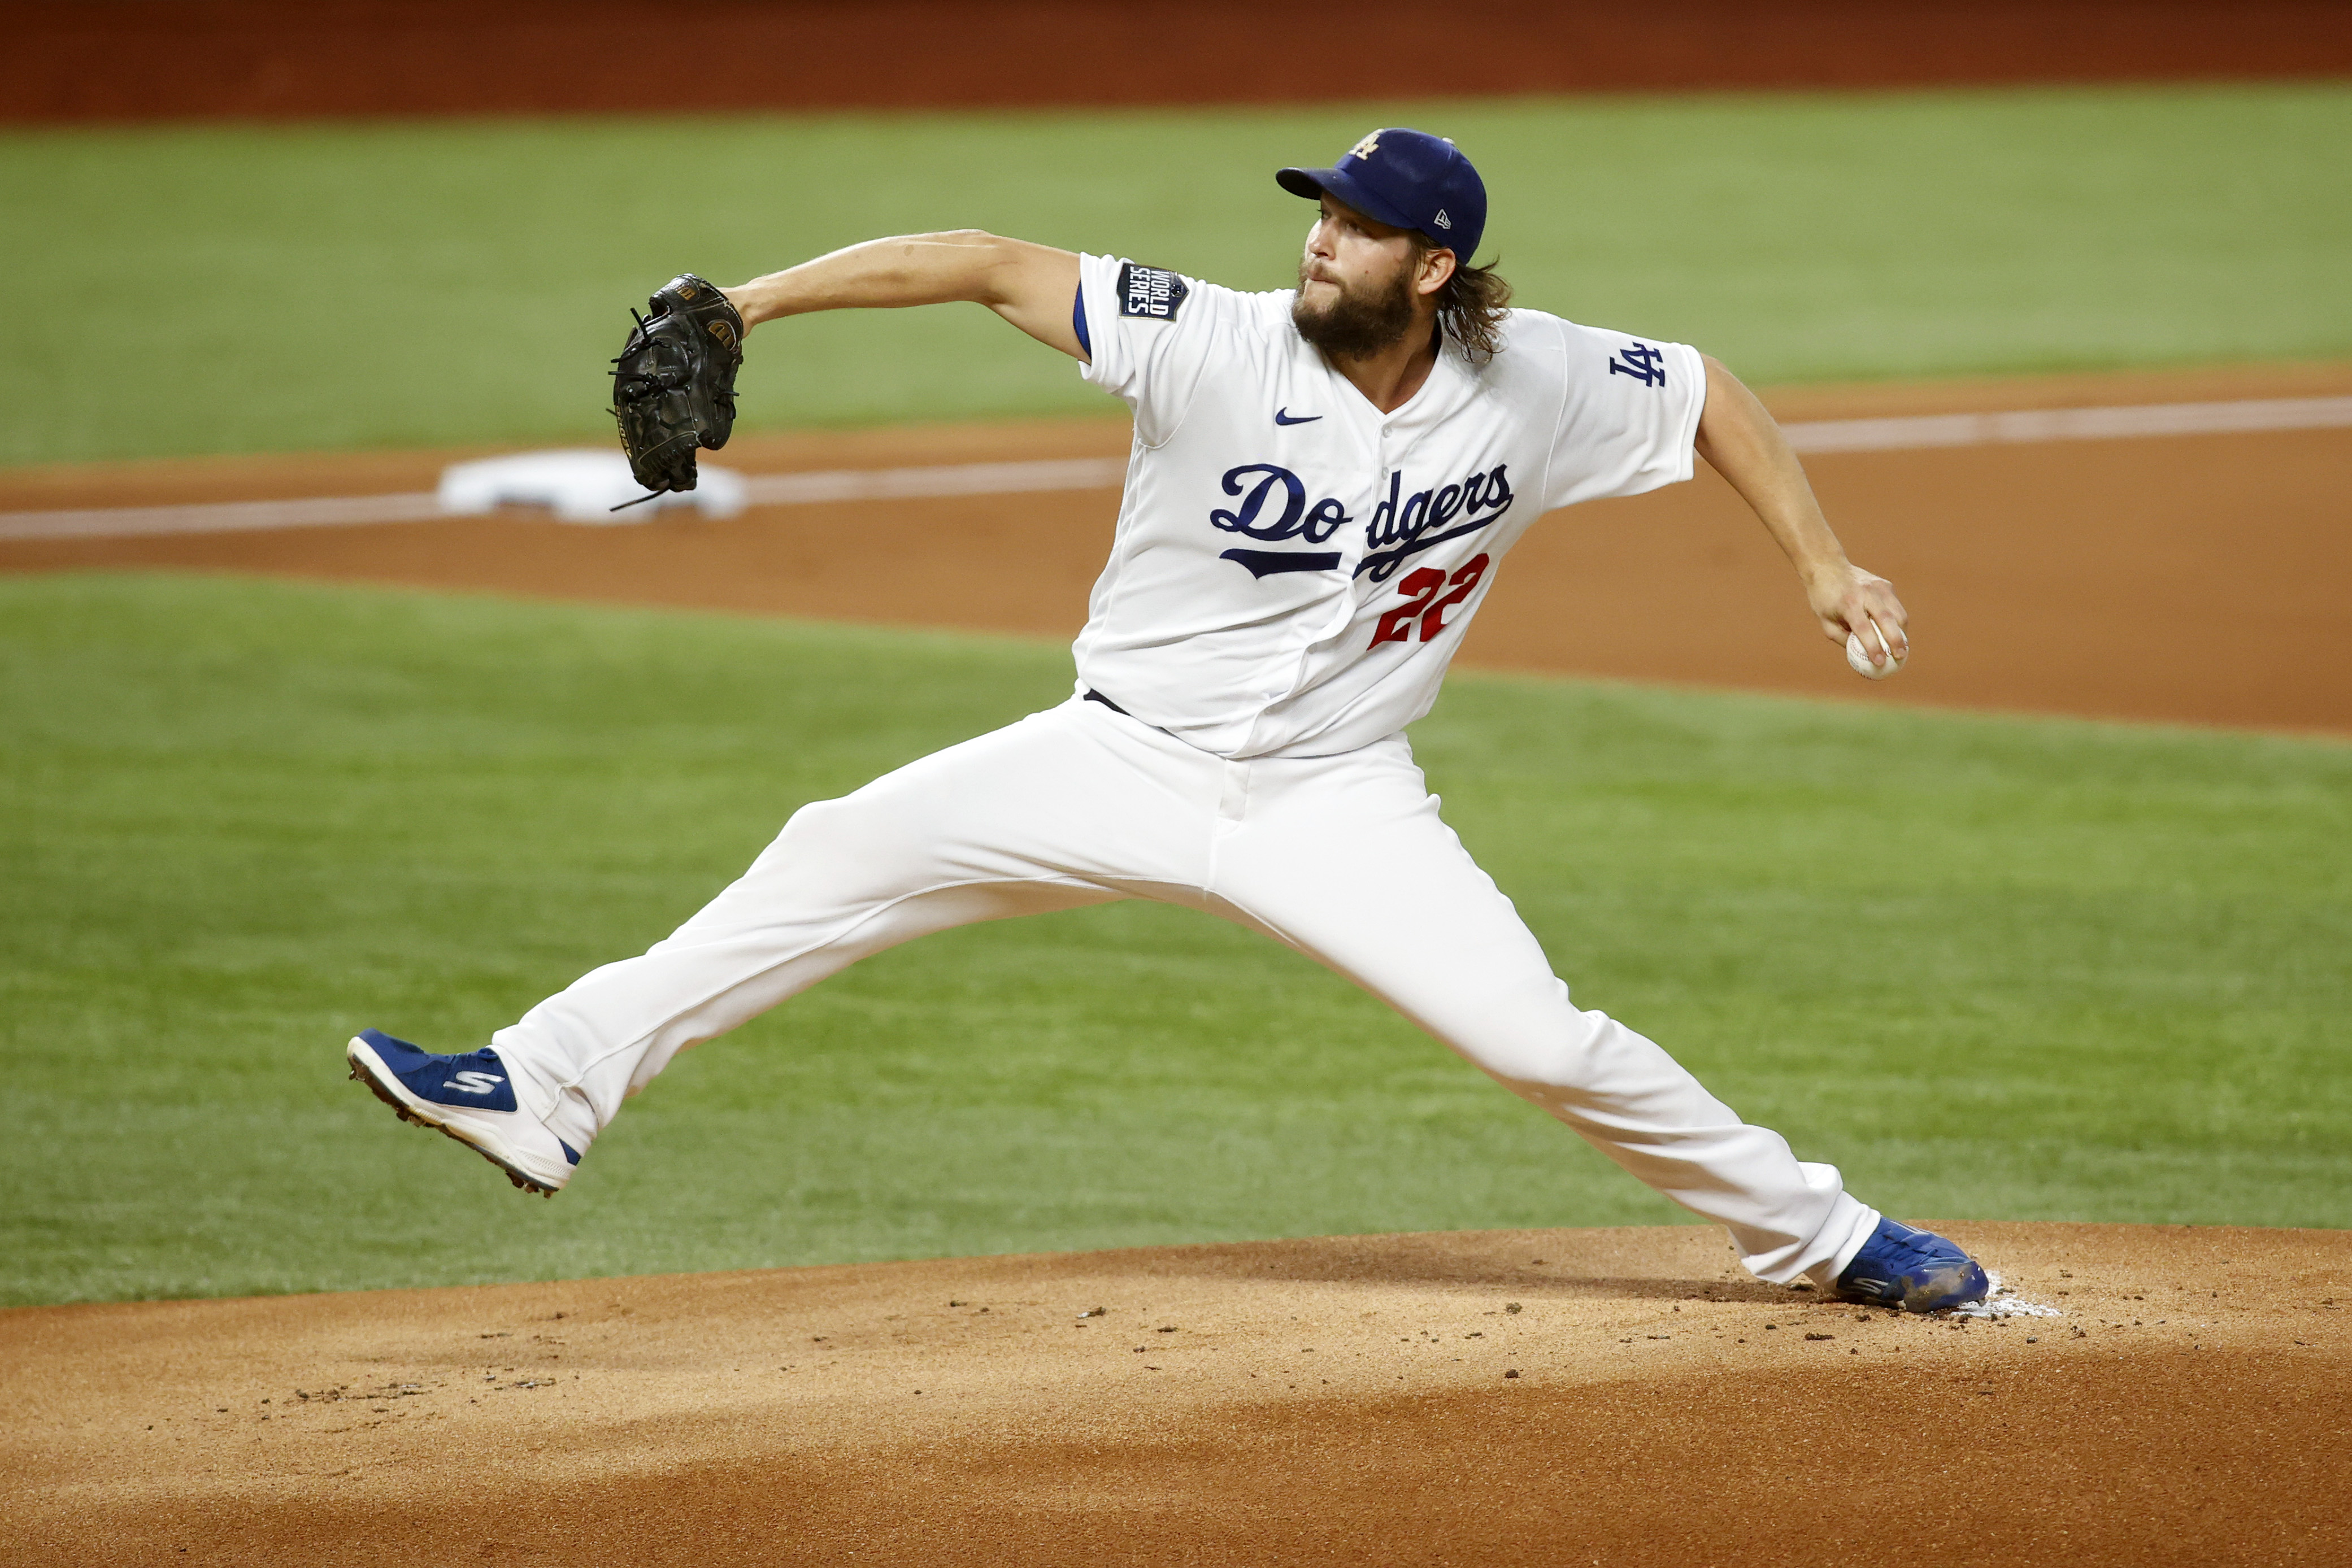 Walker Buehler dominates Rays in Game 3, gives Dodgers 2-1 series lead -  The Boston Globe